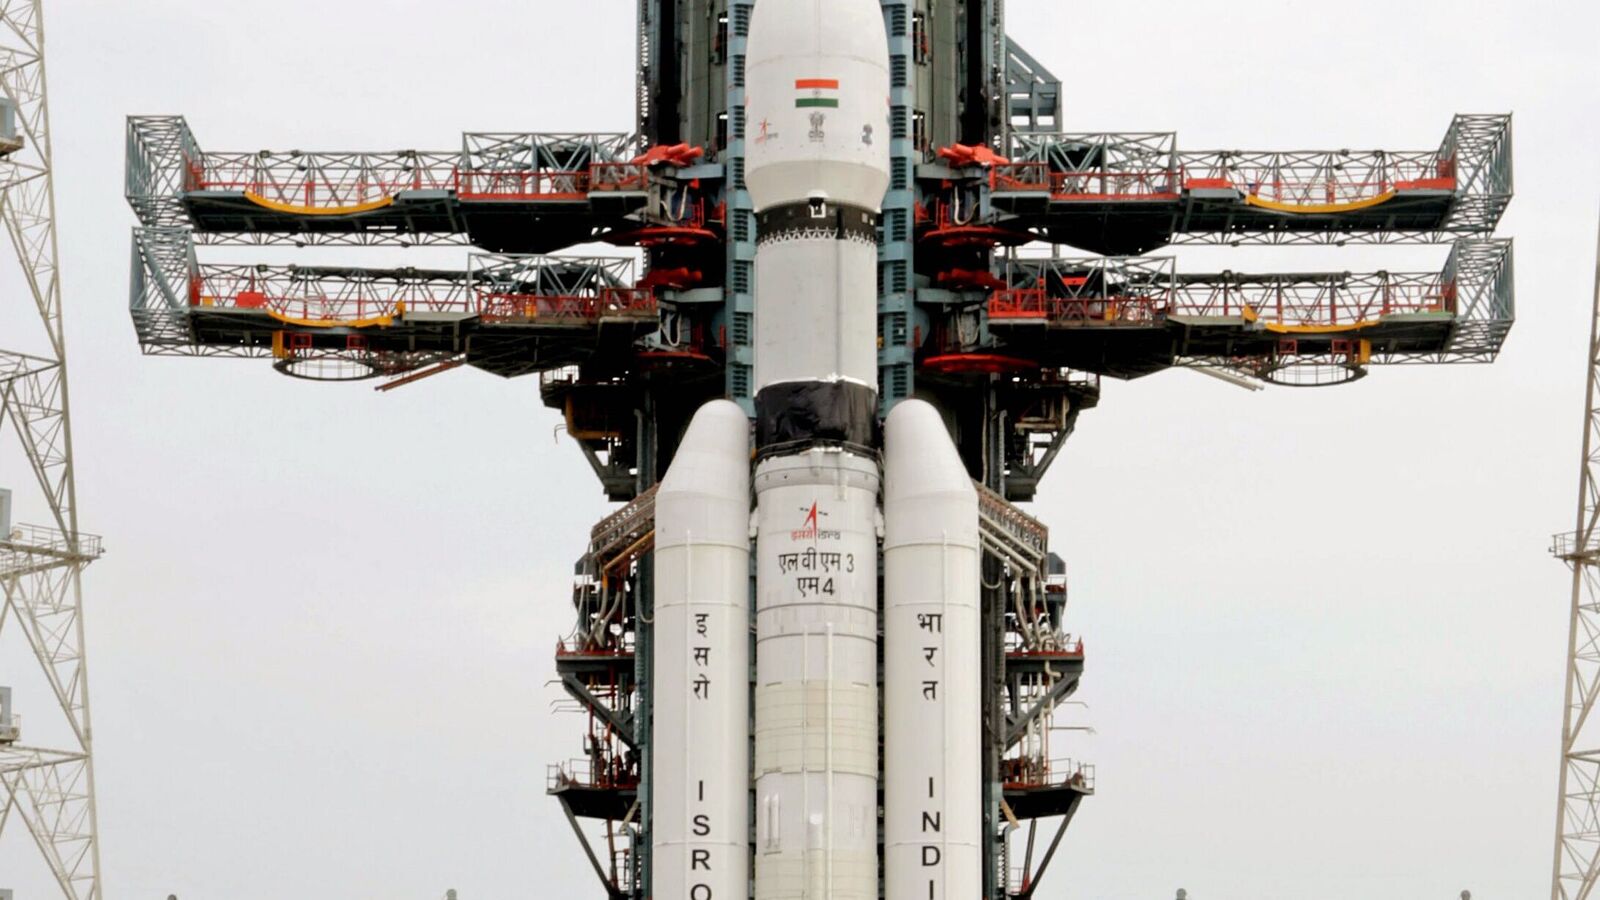 ISRO To Launch Chandrayaan 3 On Friday, Jitendra Singh Says 'tremendous Excitement'. All About The Mission. Mint #AskBetterQuestions